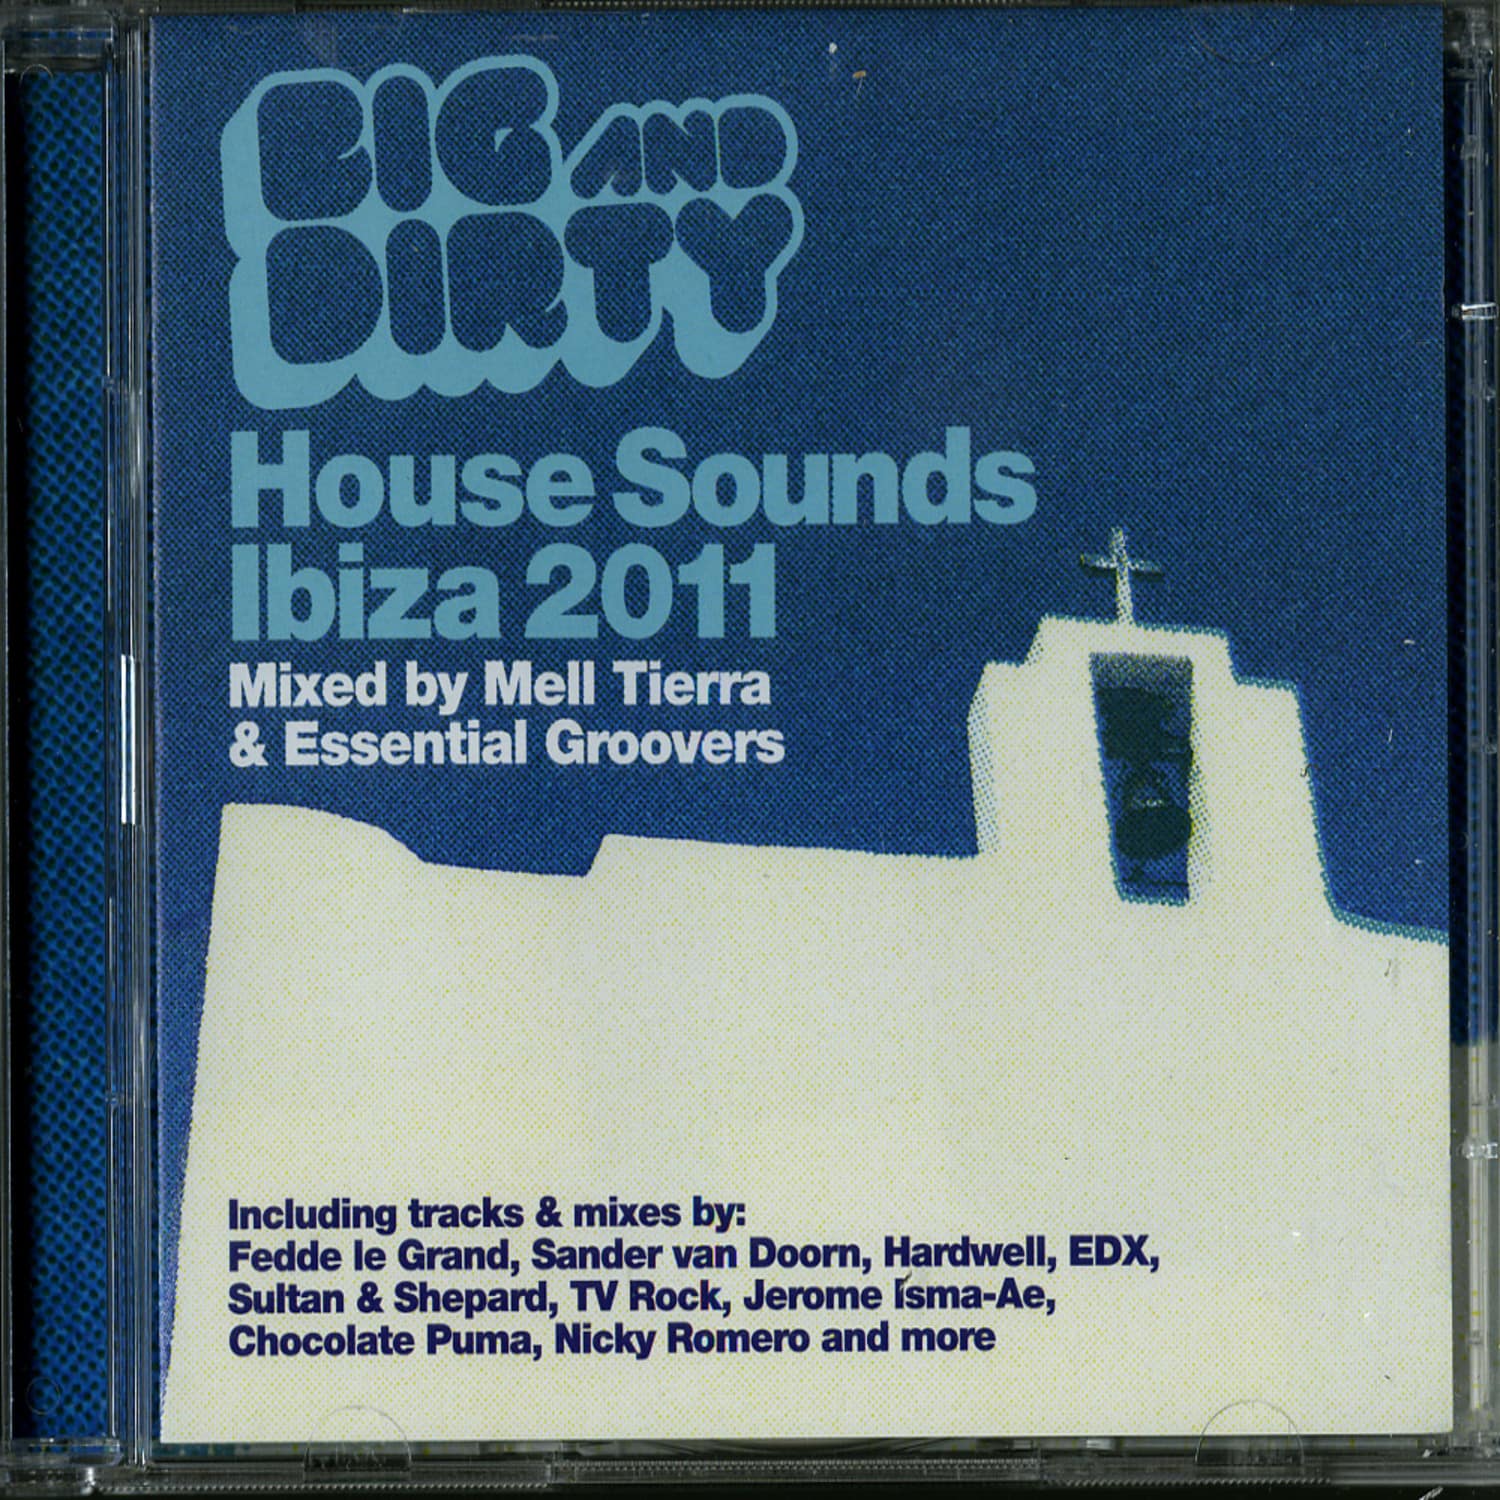 Mell Tierra&essential Groovers - BIG&DIRTY SOUNDS IBIZA 2011 